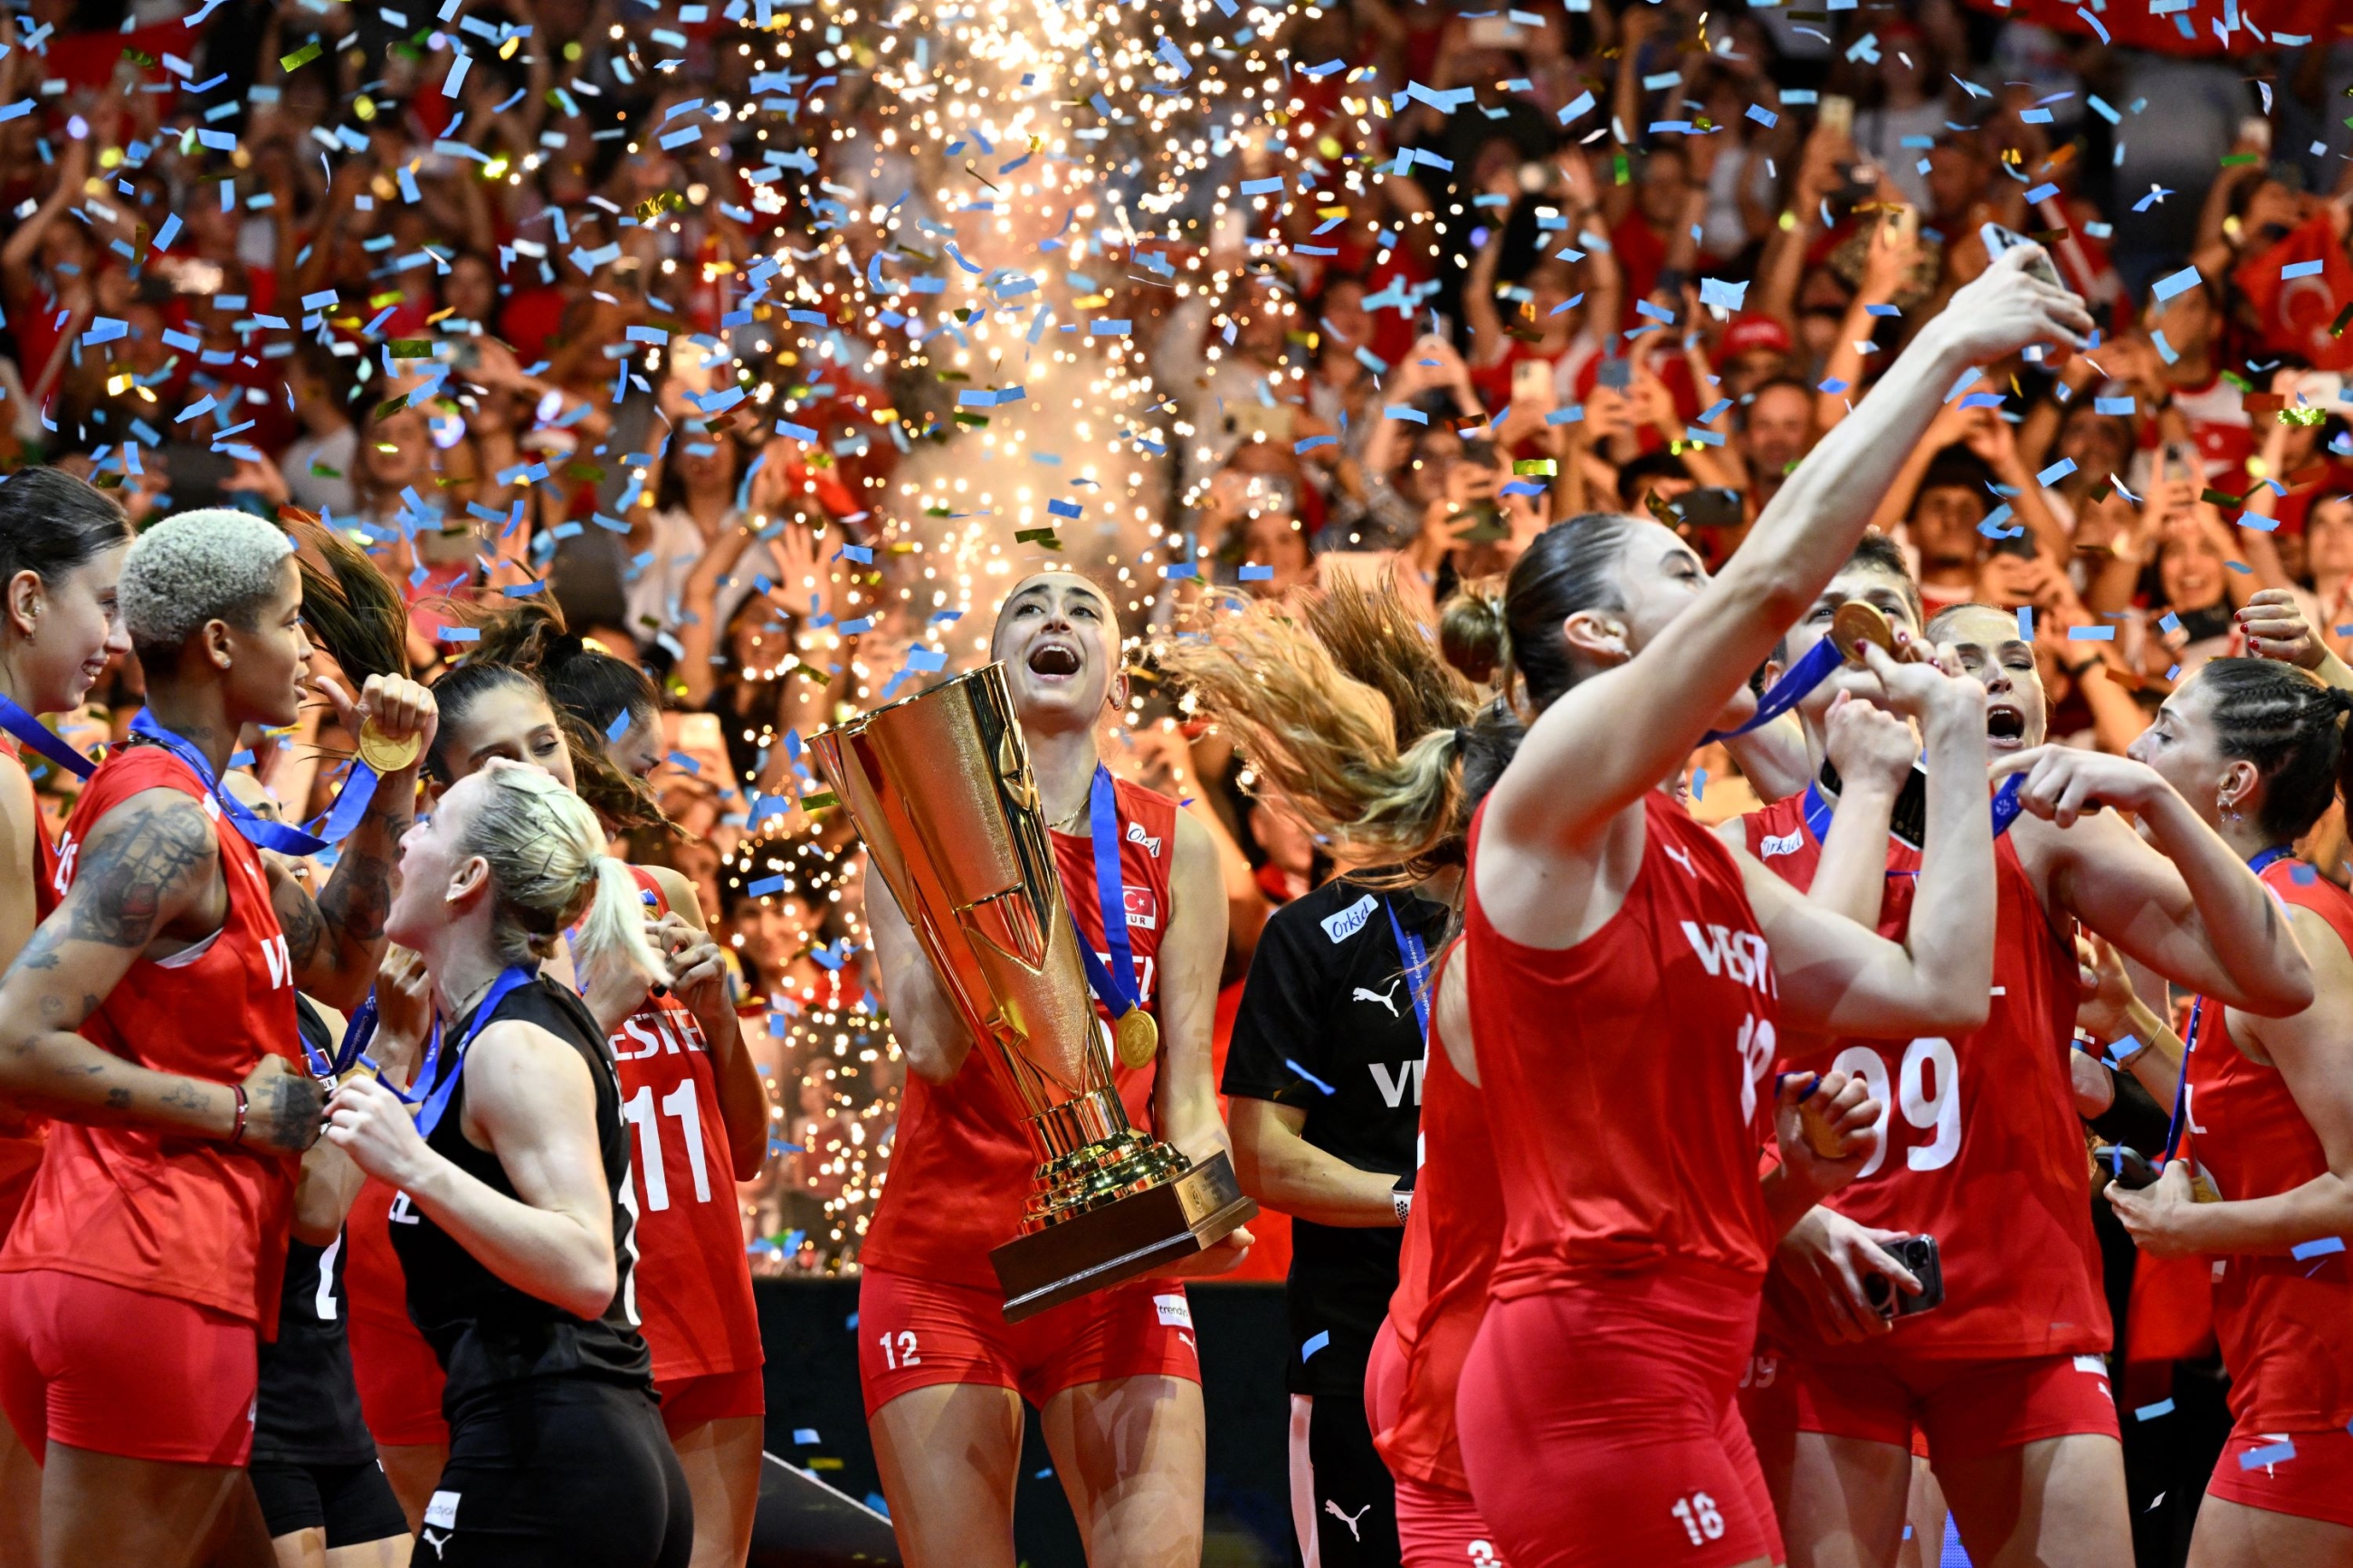 Turkey's team players celebrate their victory after winning the Women's EuroVolley 2023 final volleyball match against Serbia, in Brussels on 3 September 2023 (AFP)